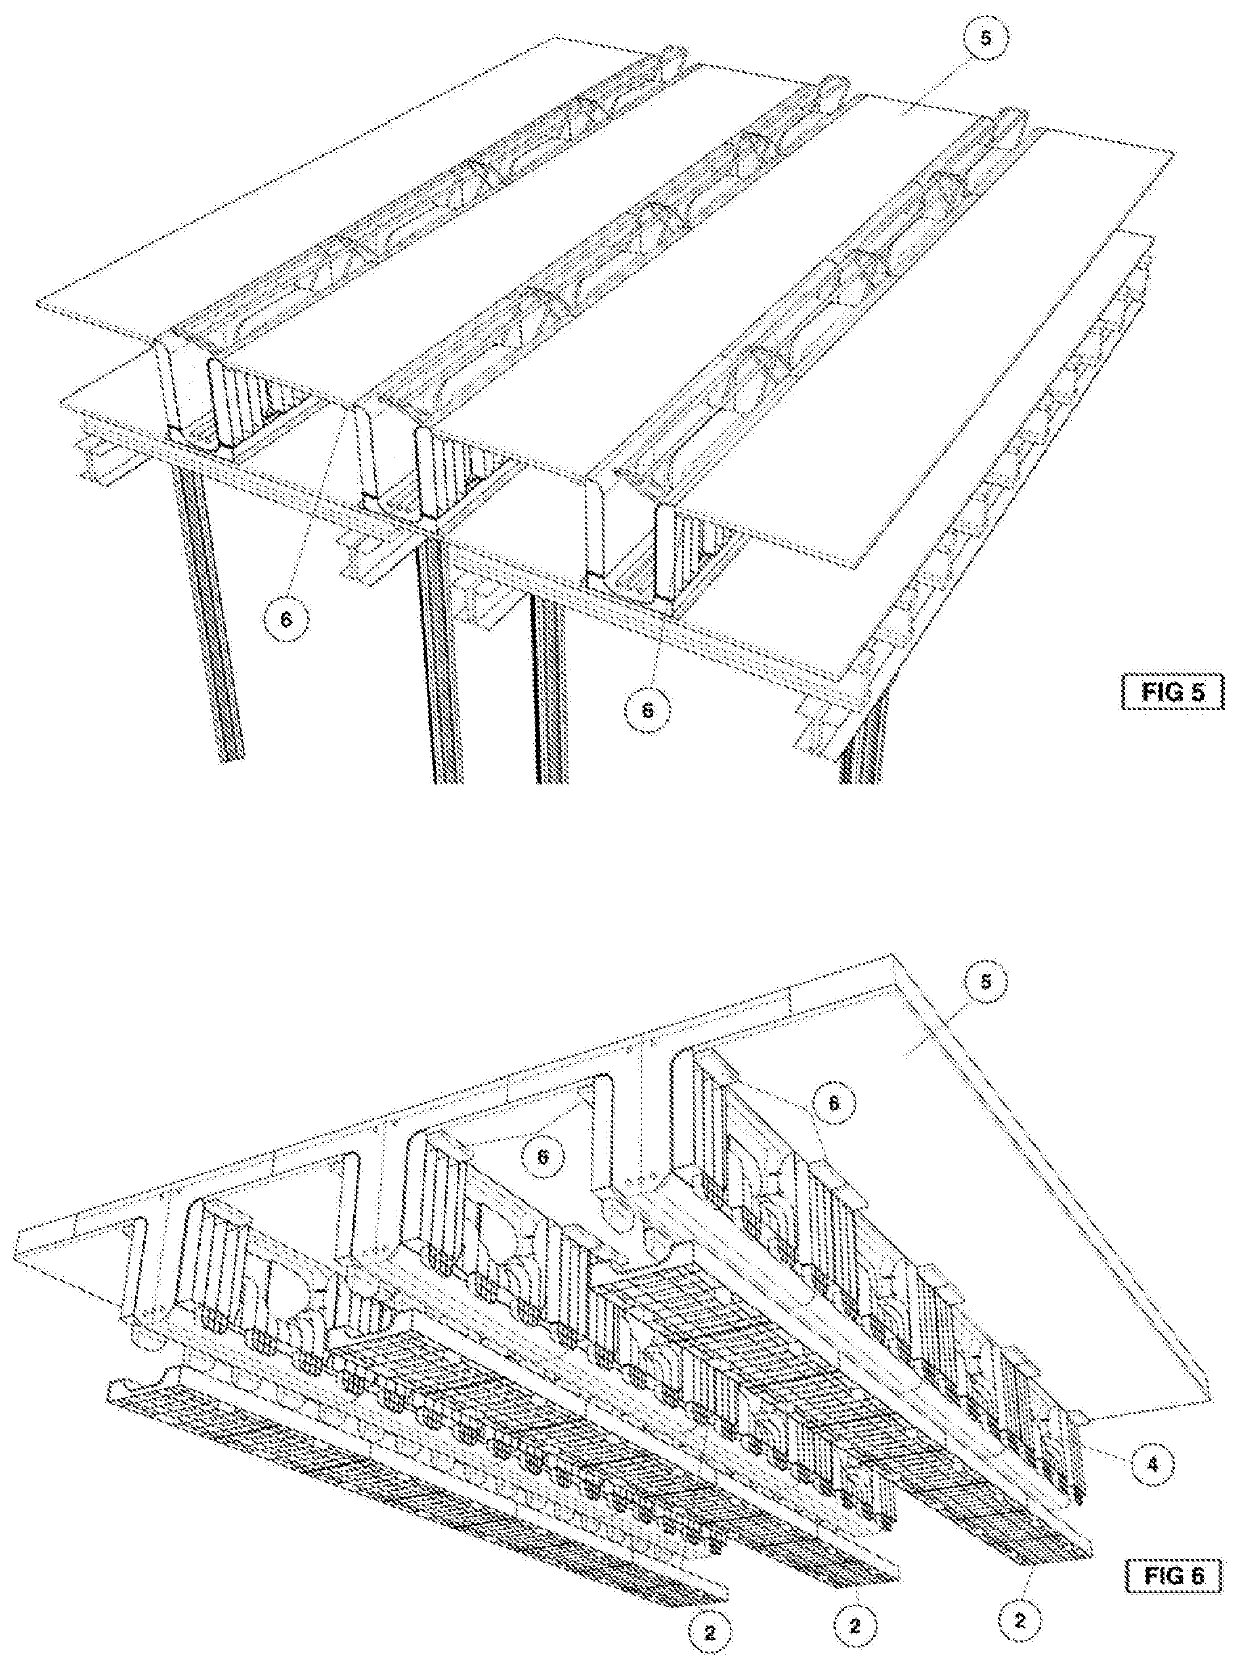 Moulding unit for girder construction by means of quick-assembly systems